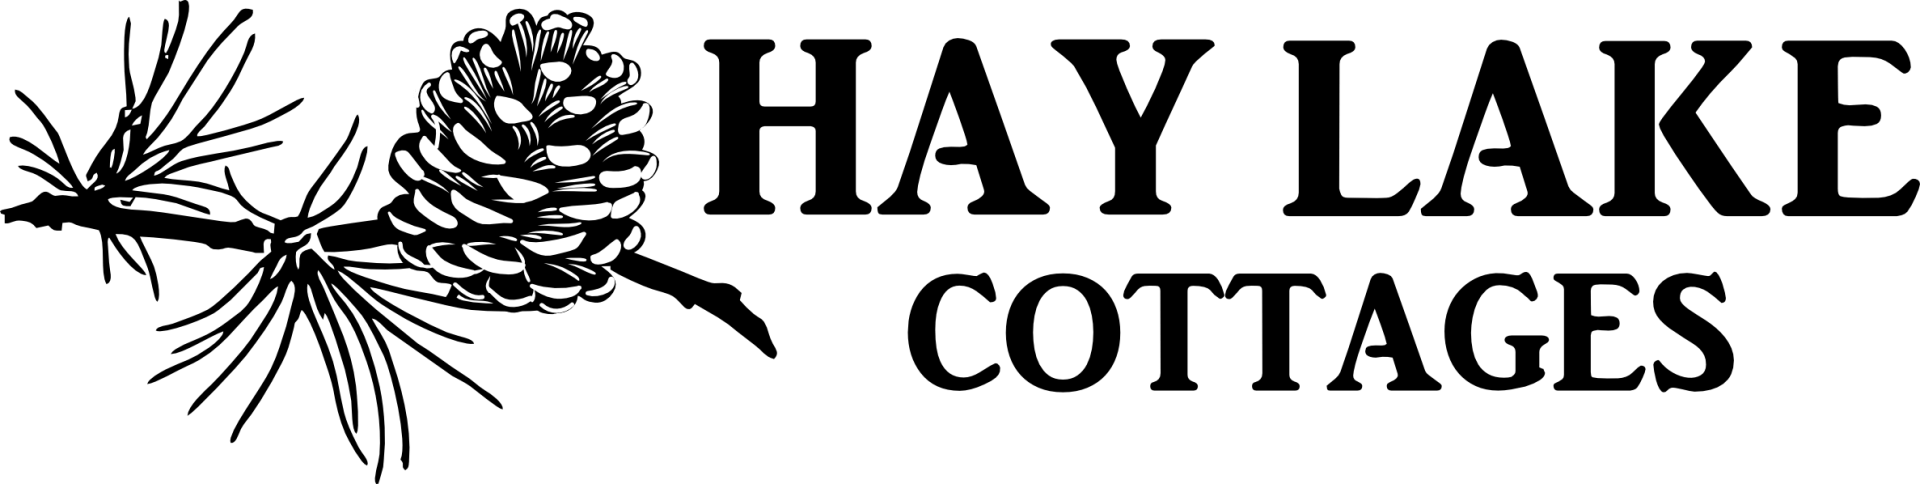 A black and white logo for hay lake cottages